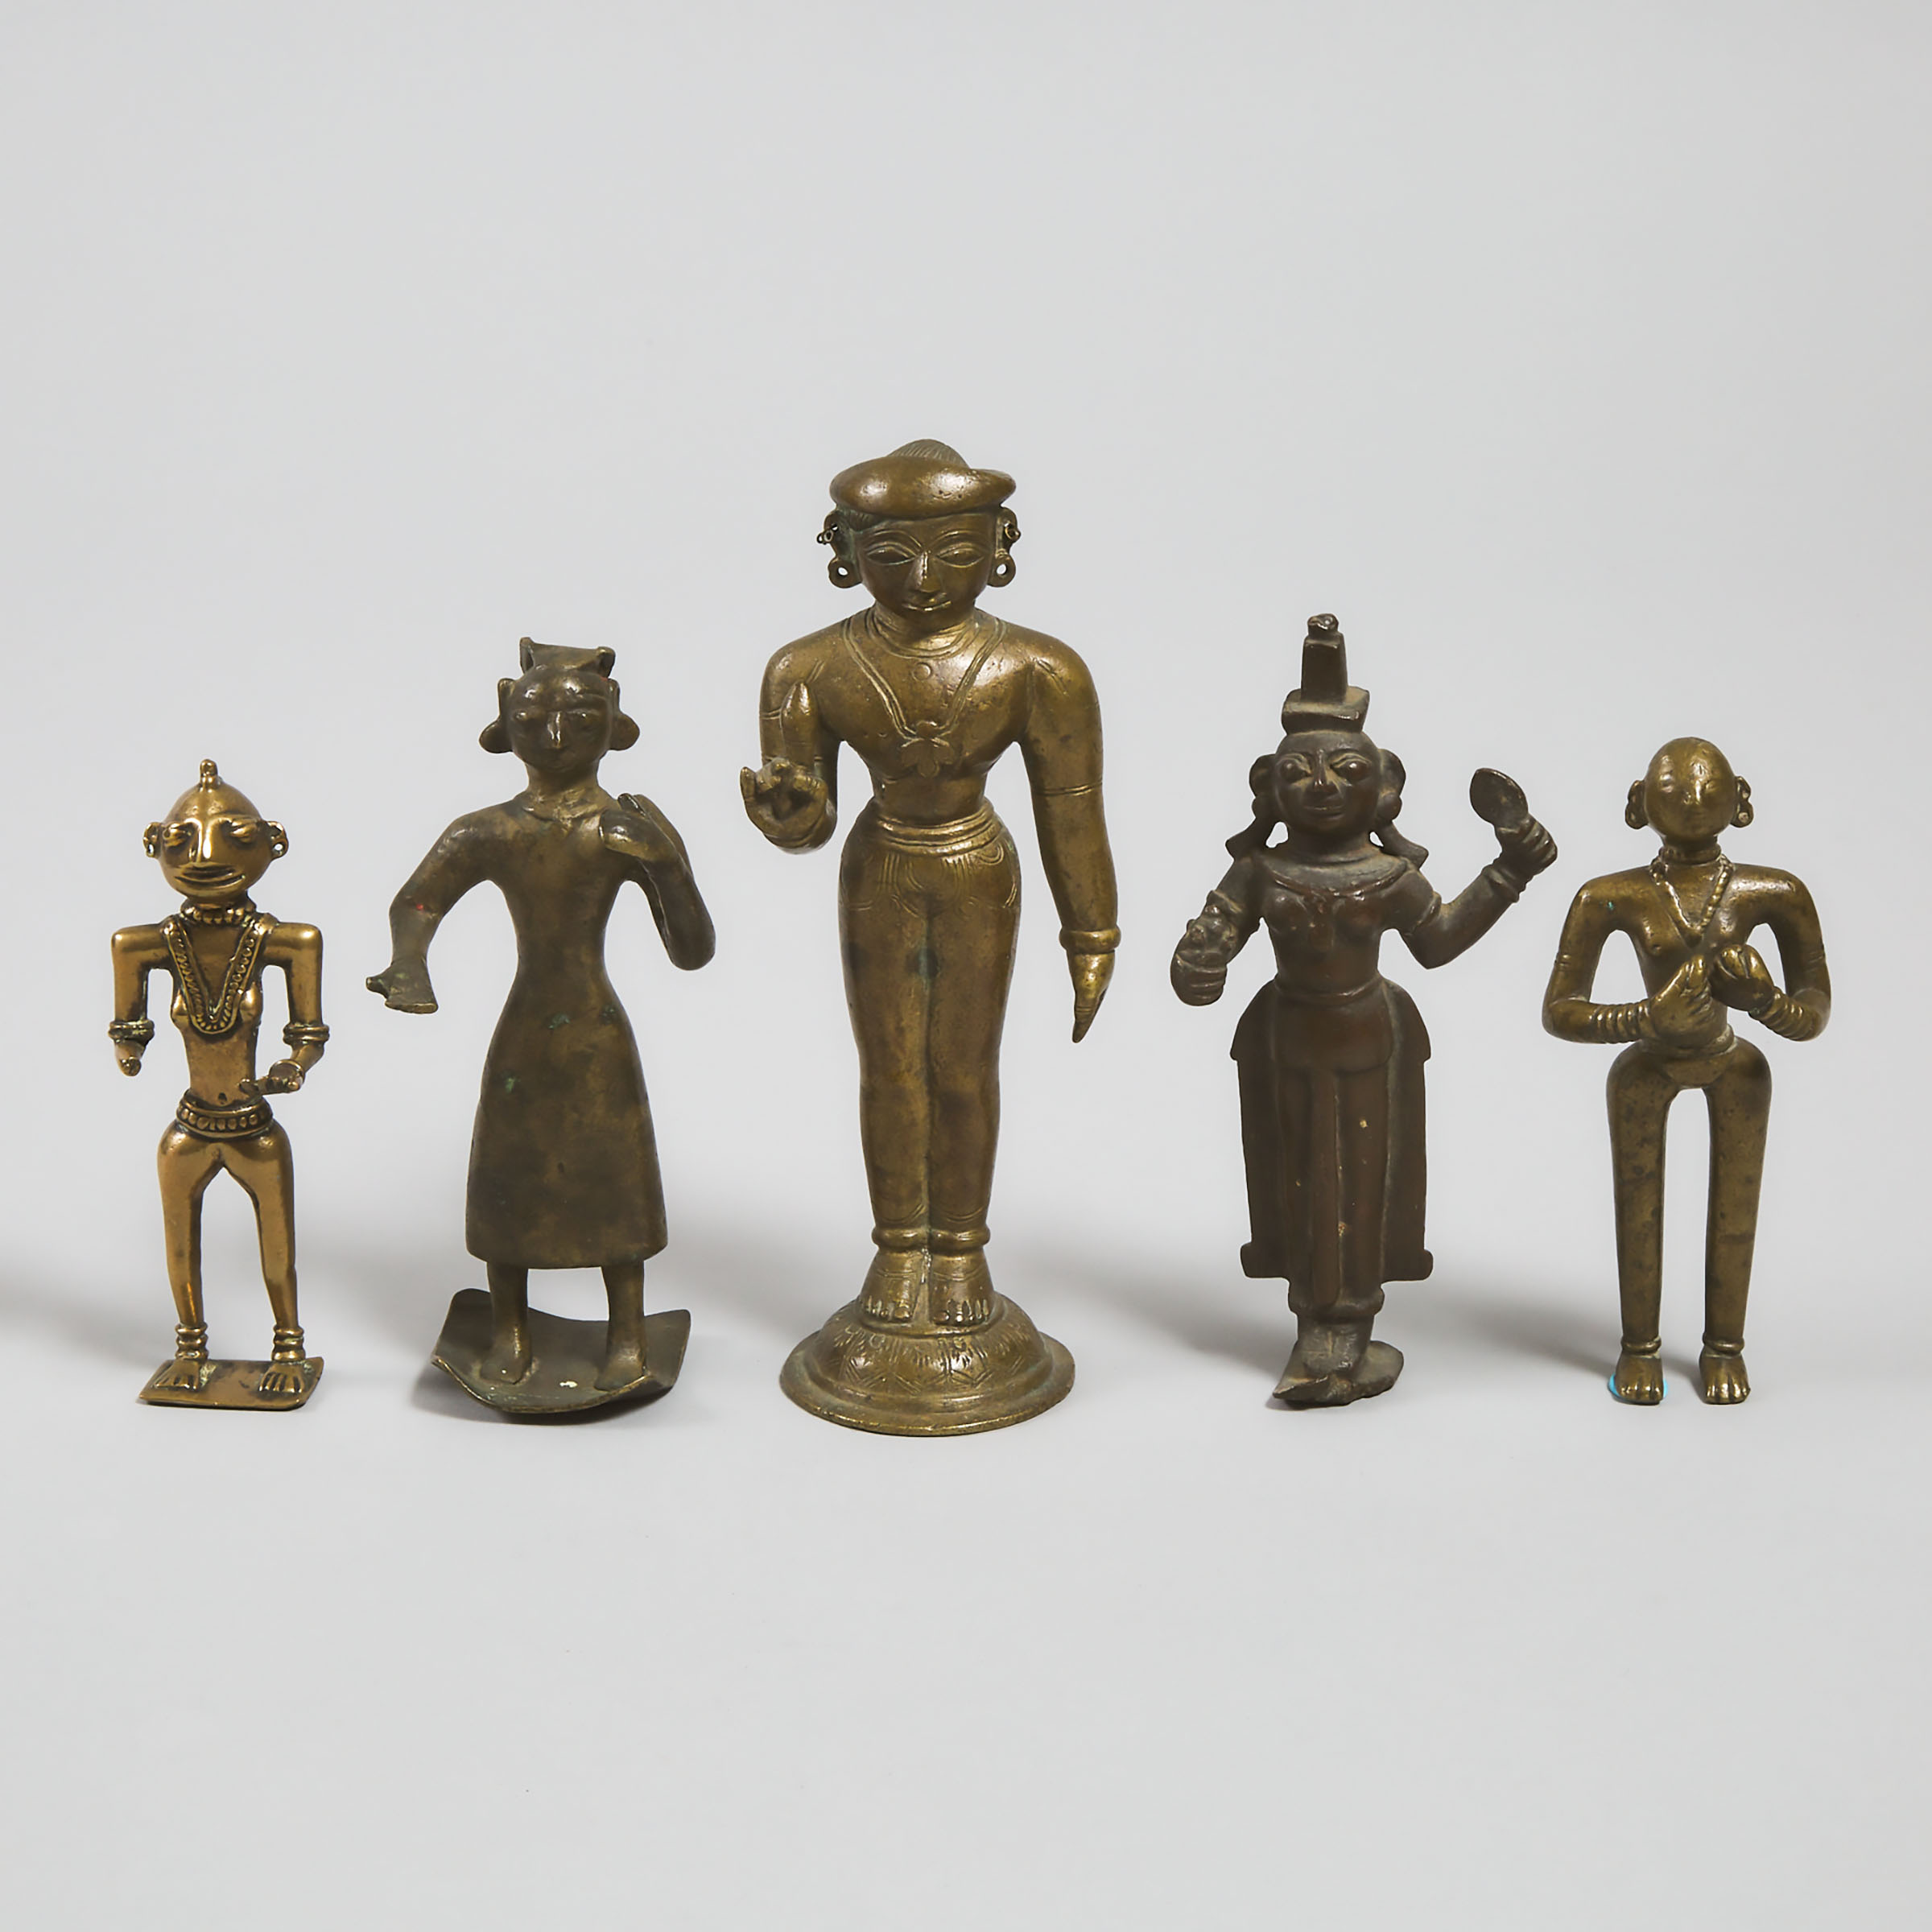 Group of Five Miniature Bronze Figures of Hindu Deities, 16th century and later